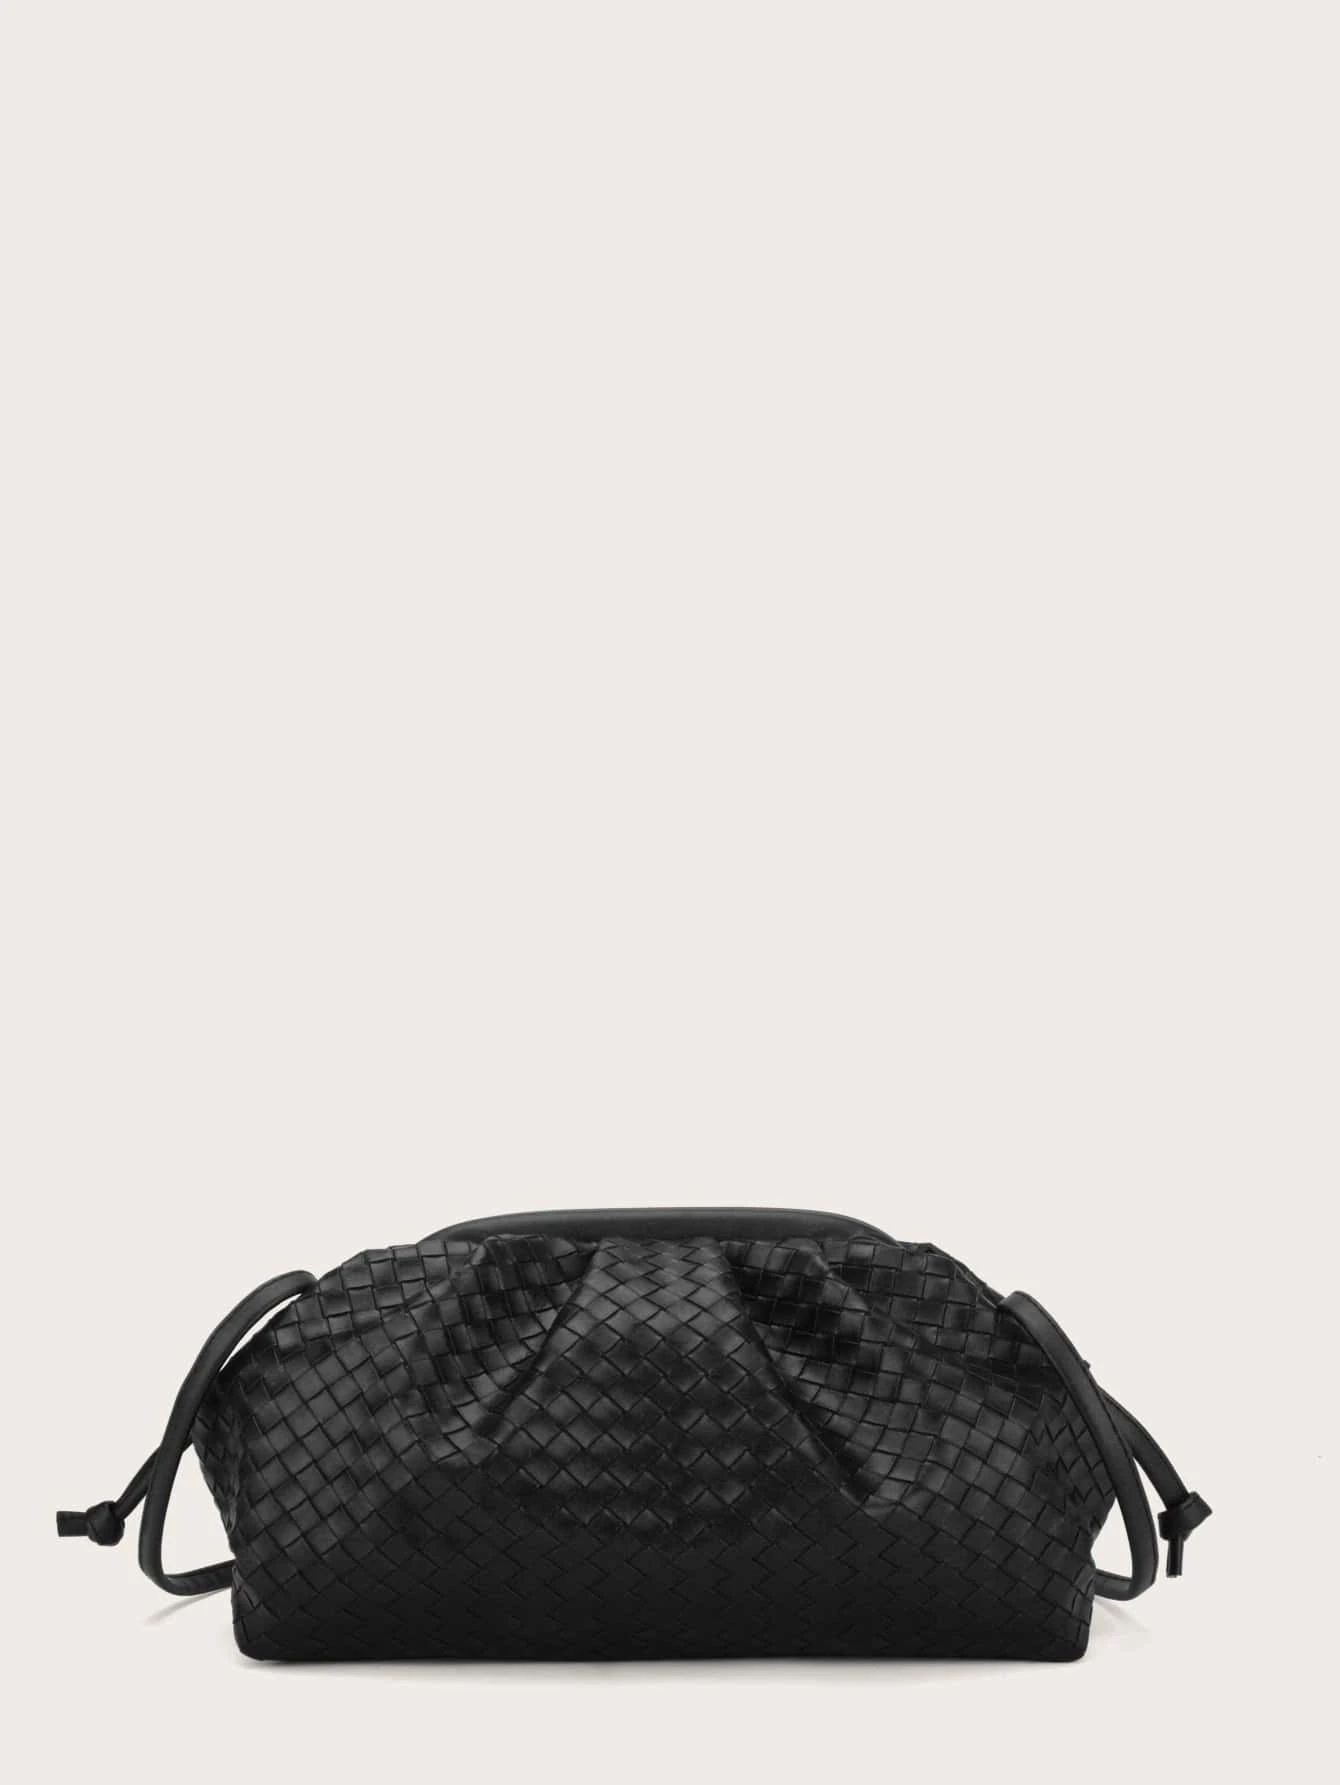 Woven Pattern Ruched Bag | SHEIN